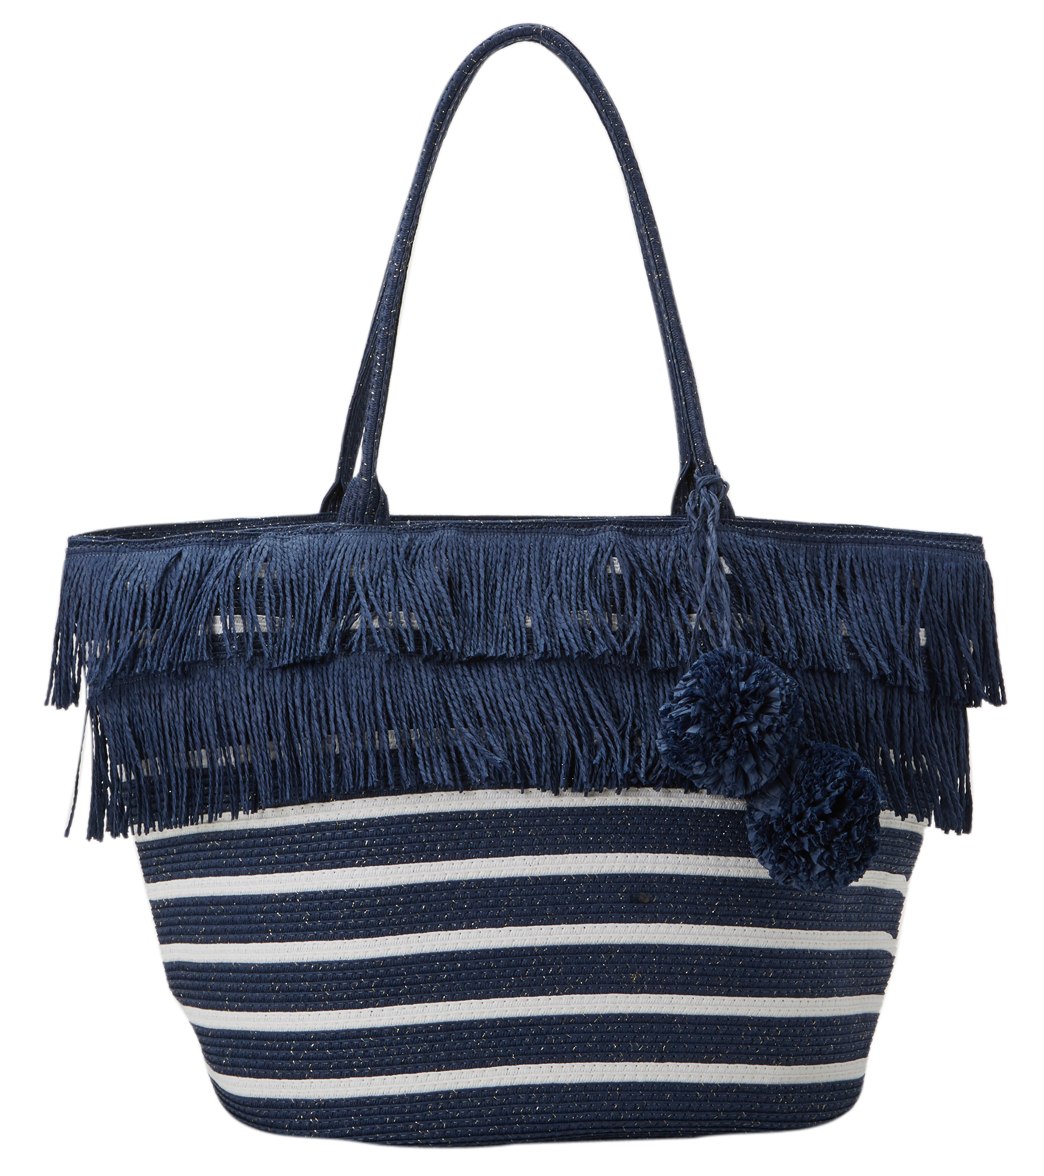 Pia Rossini Mykonos Straw Tote Bag at SwimOutlet.com - Free Shipping